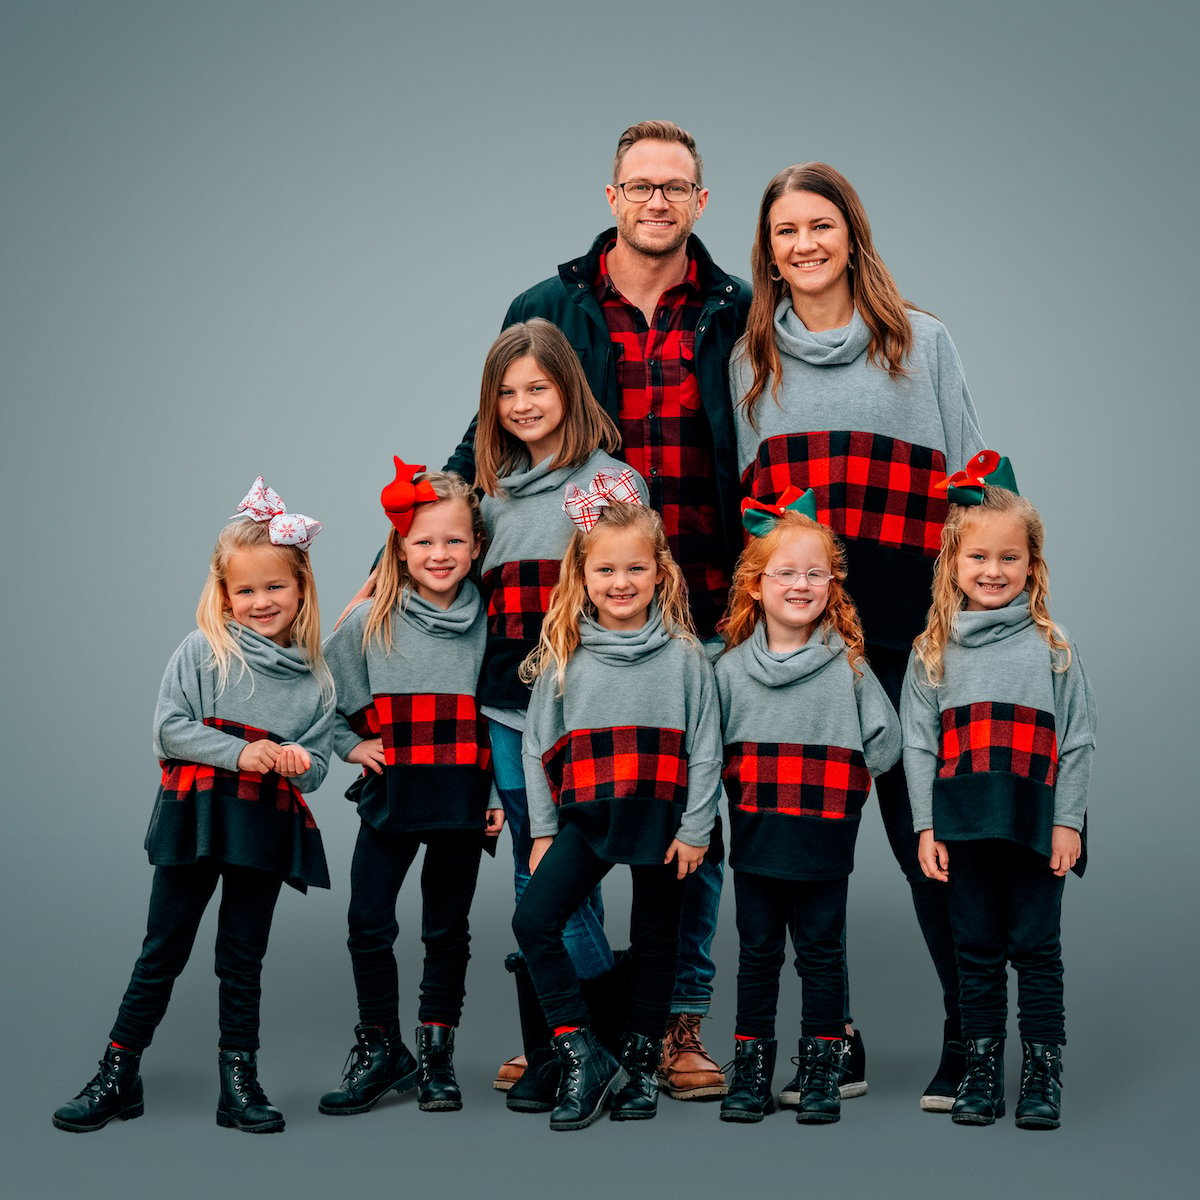 Adam and Danielle Busby with Blayke and the Busby quints on TLC's 'OutDaughtered'